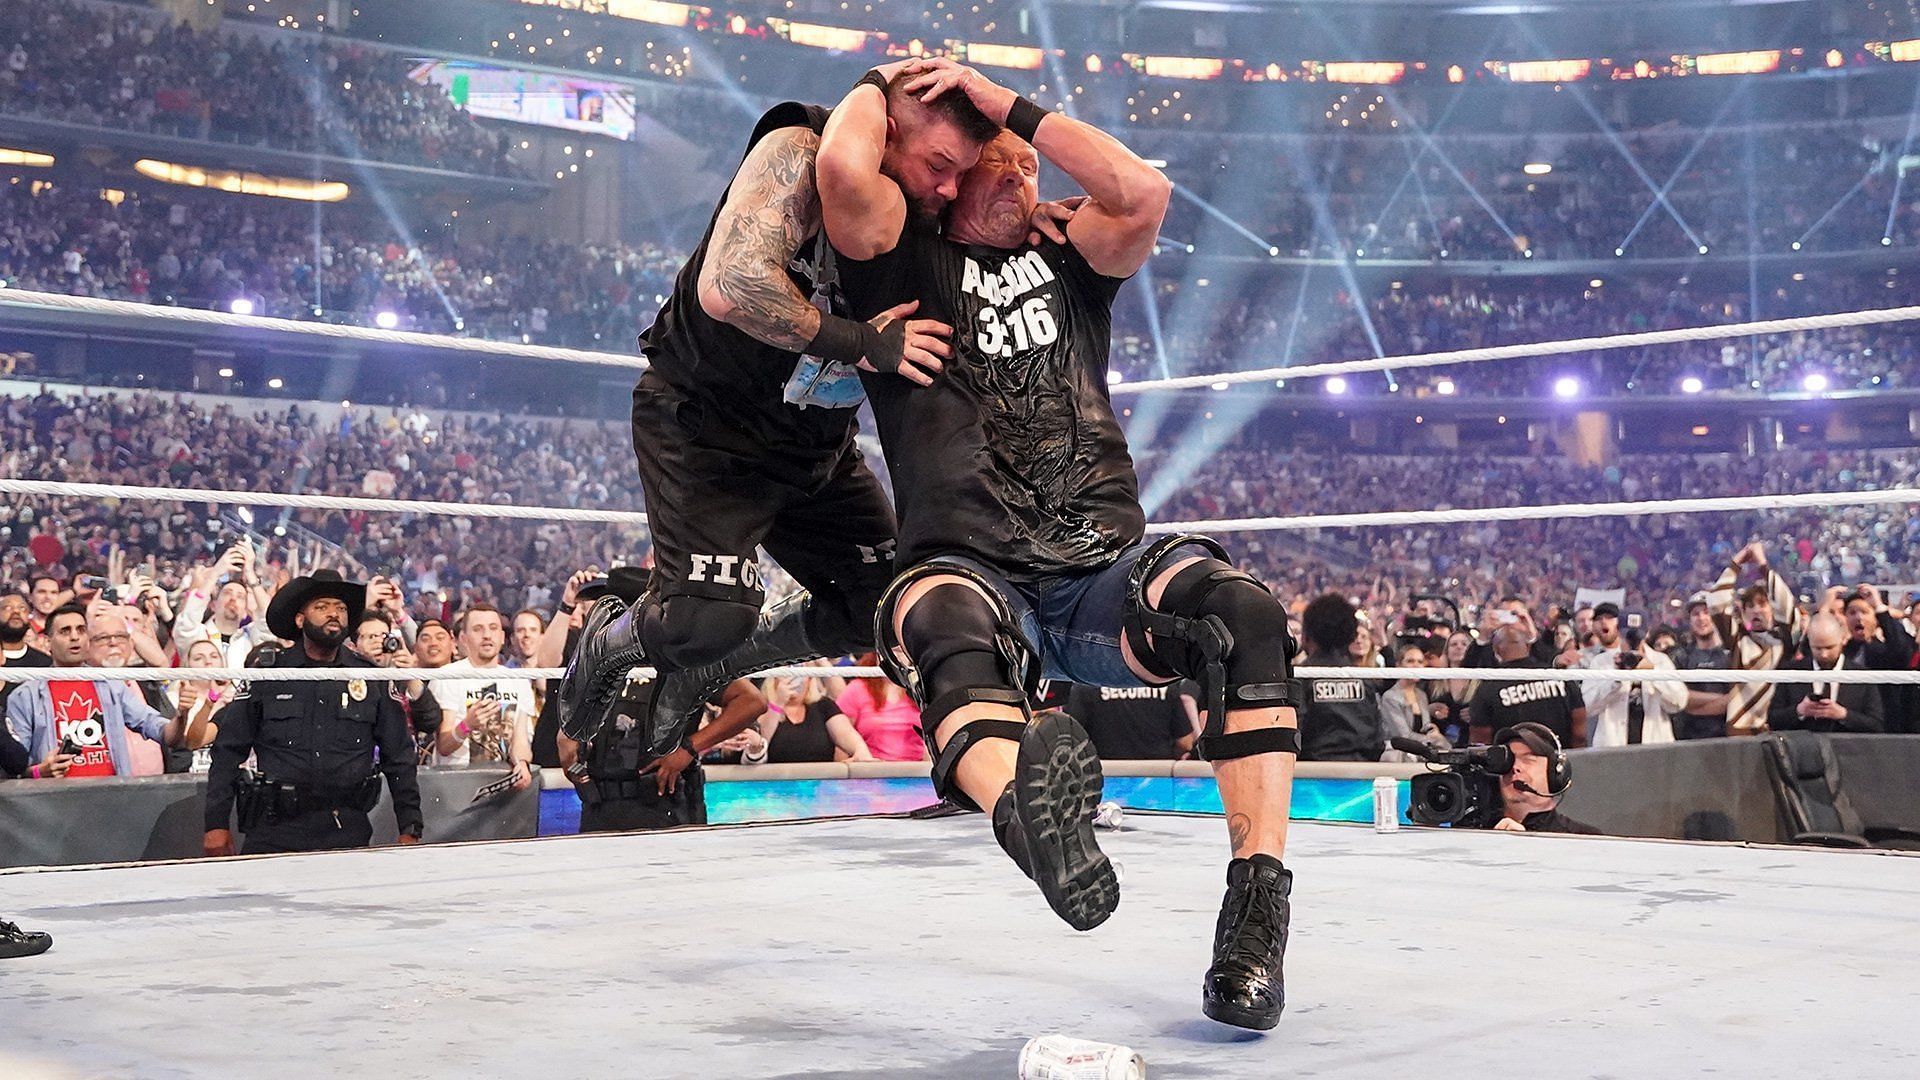 Stone Cold returned to the wrestling ring for a match at WrestleMania 38.